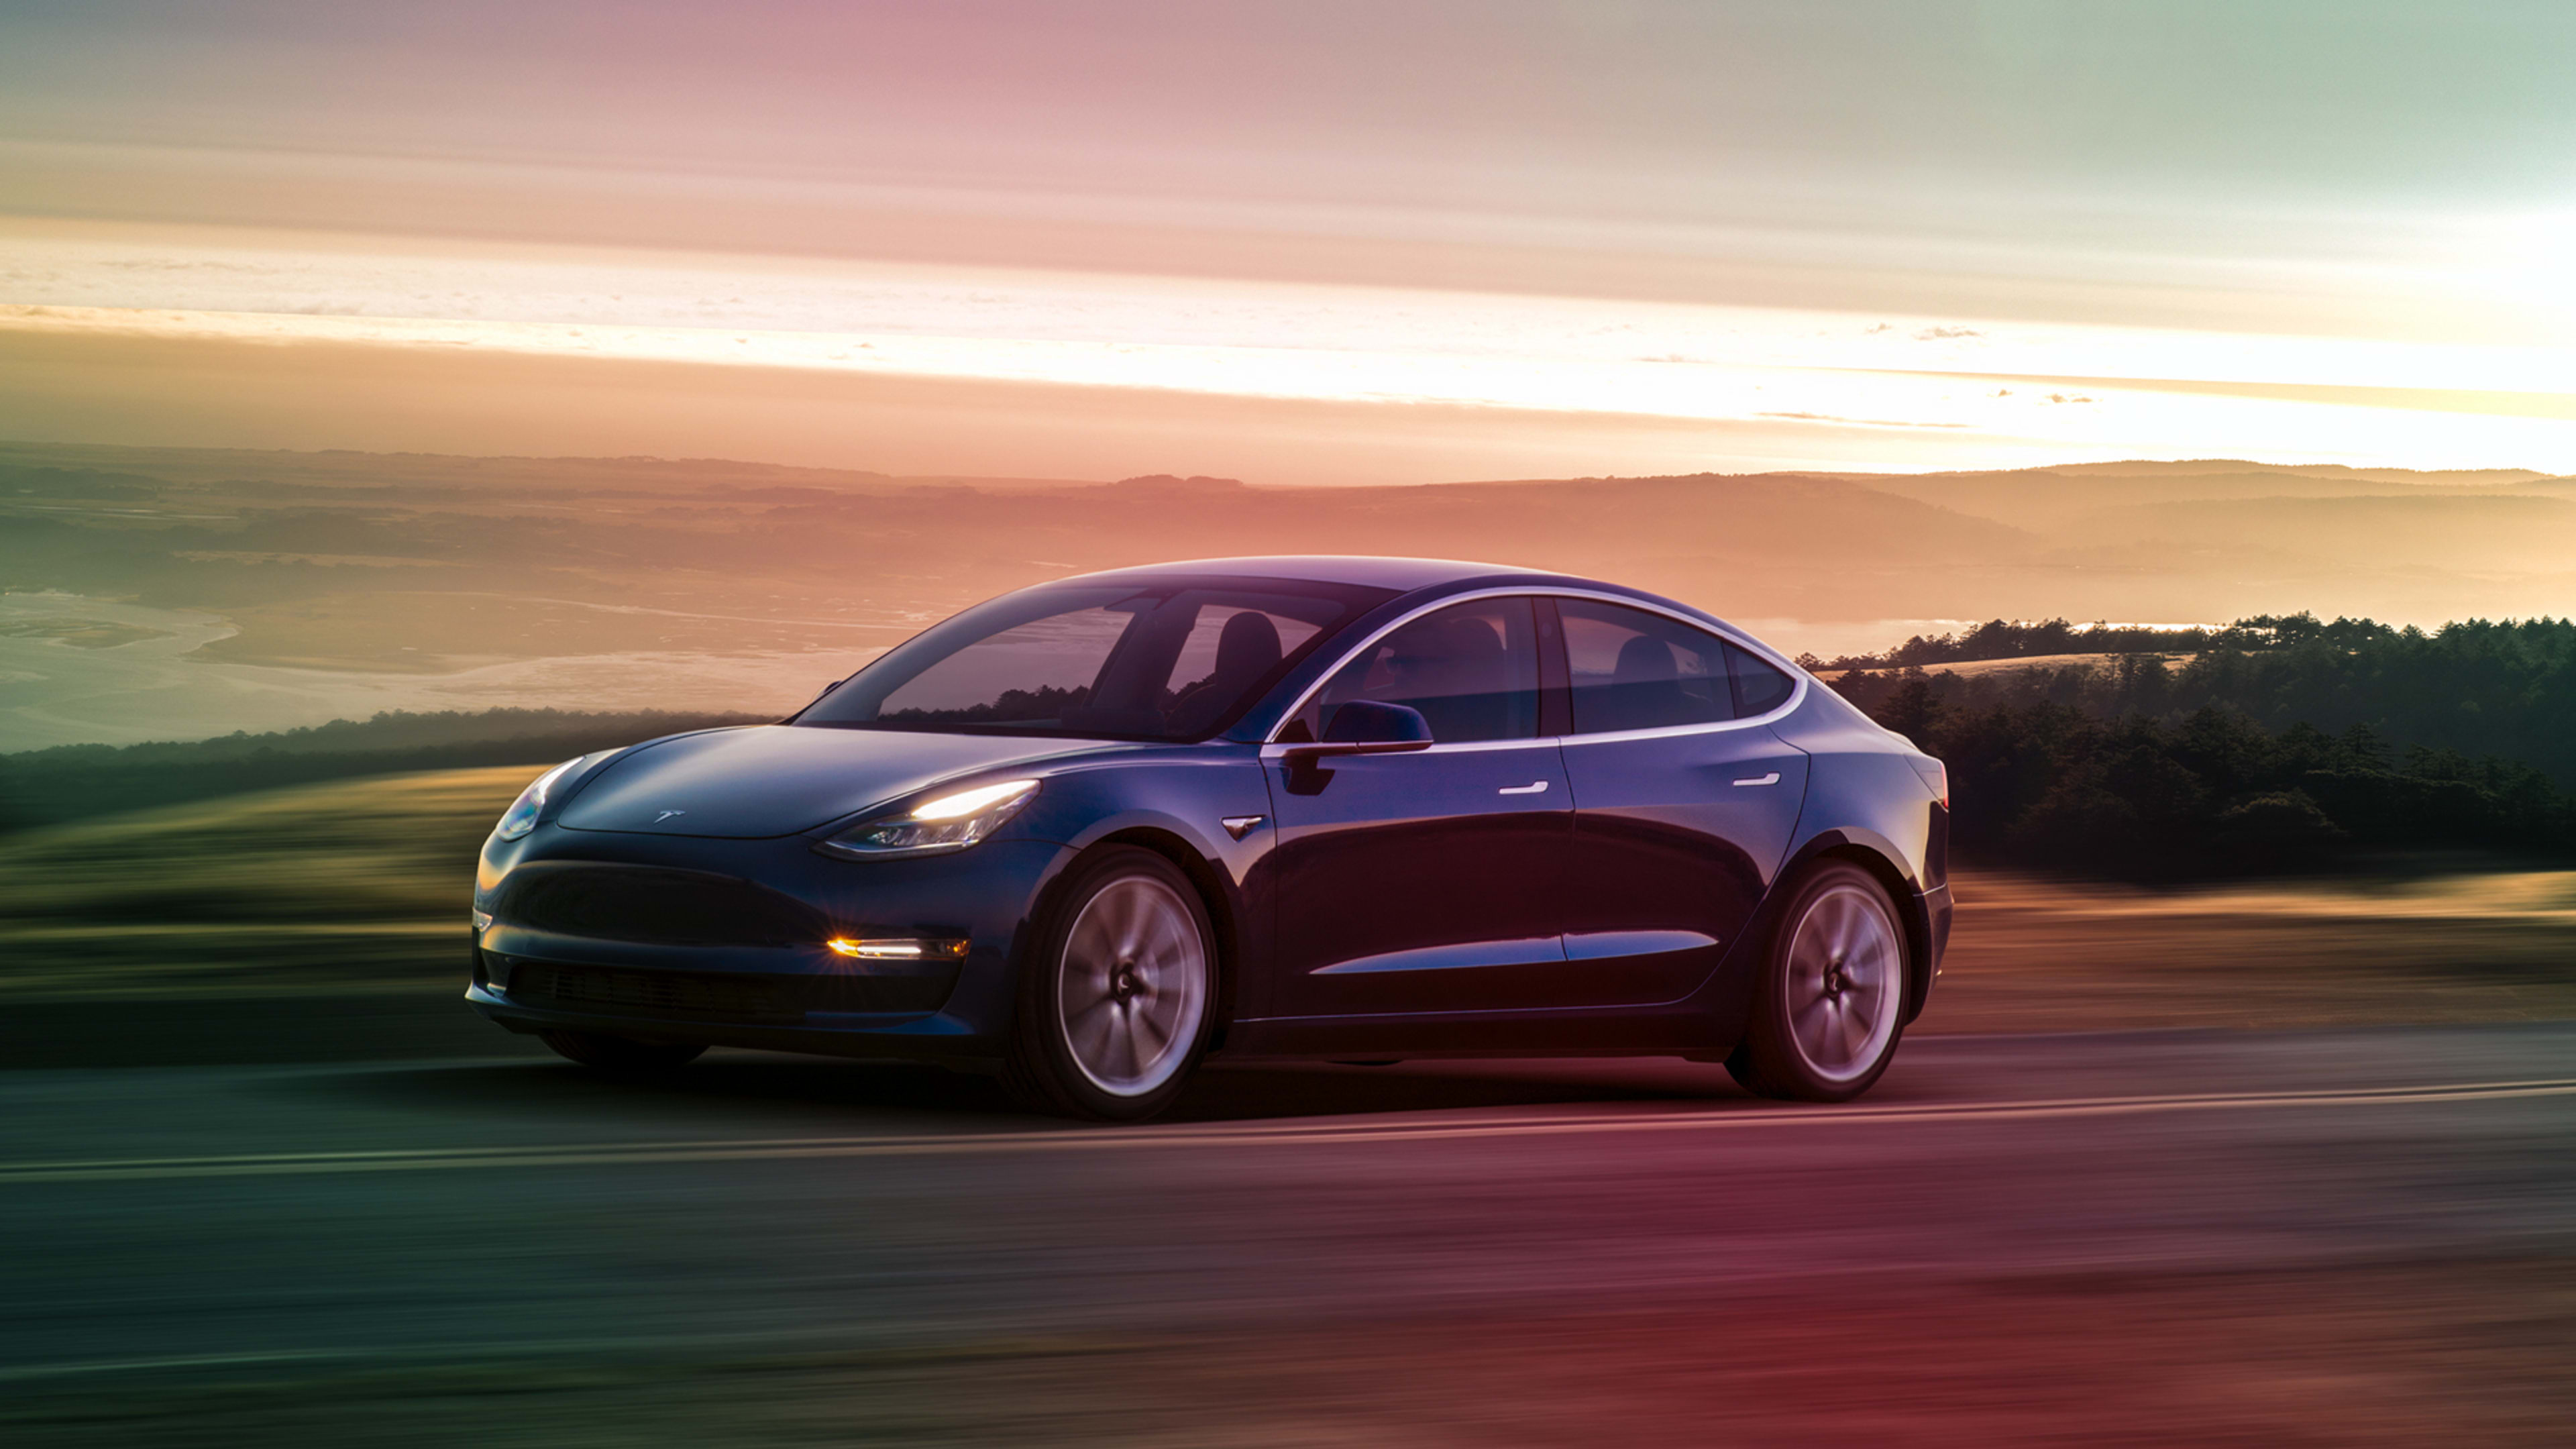 Tesla halted production of the Model 3 in February